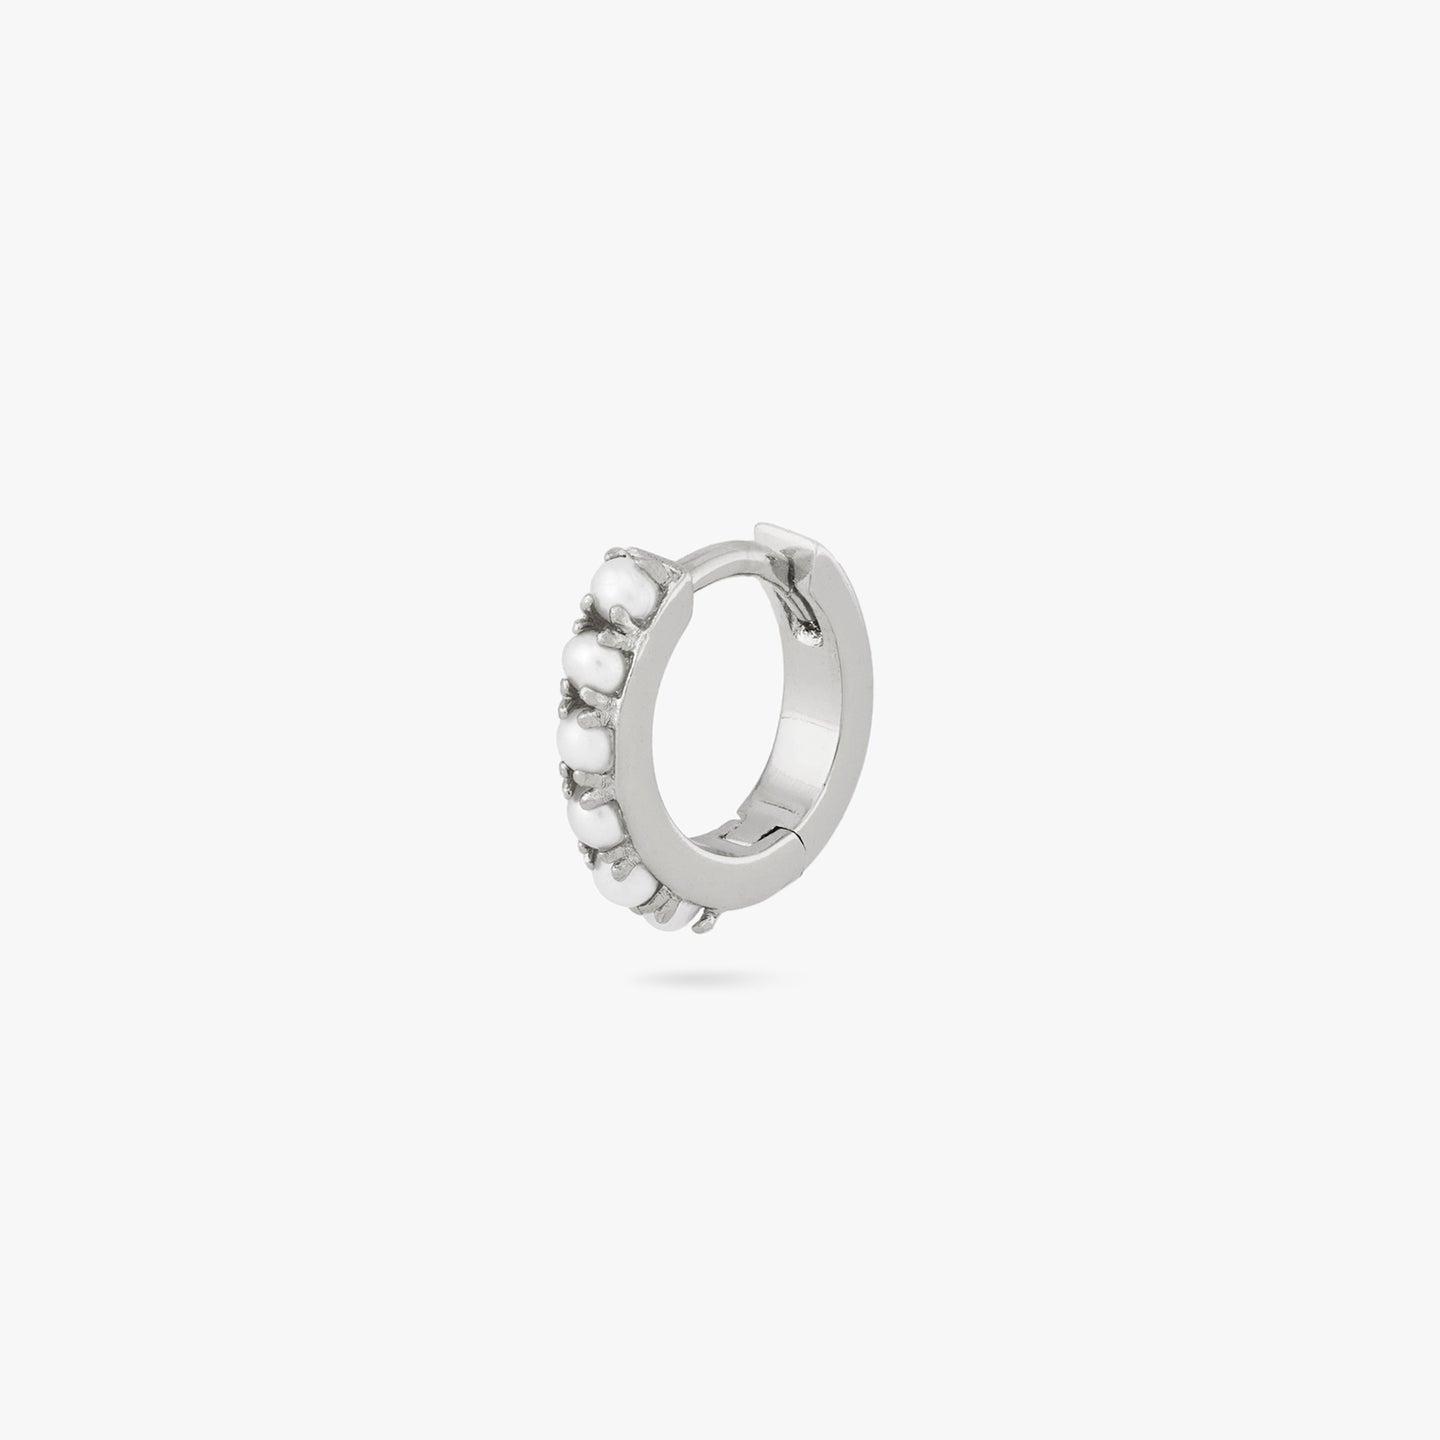 This is a small silver huggie that has small pearls lining the front of it color:null|silver